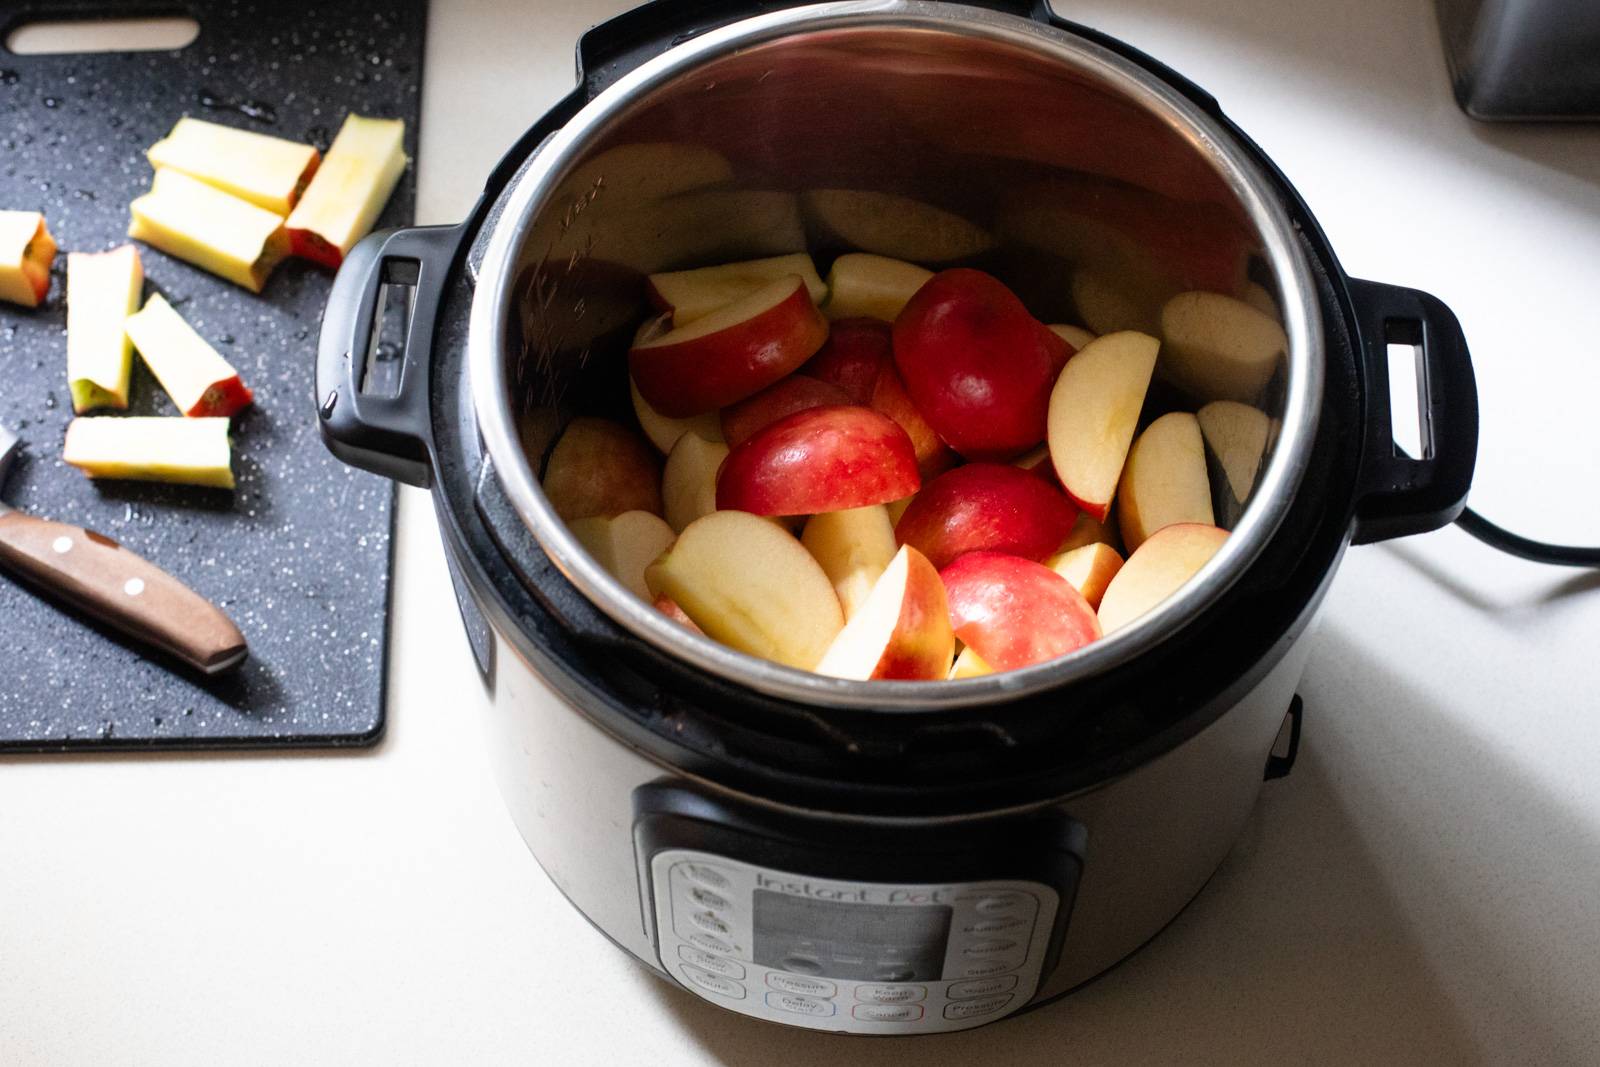 Sliced apples in an Instant Pot.